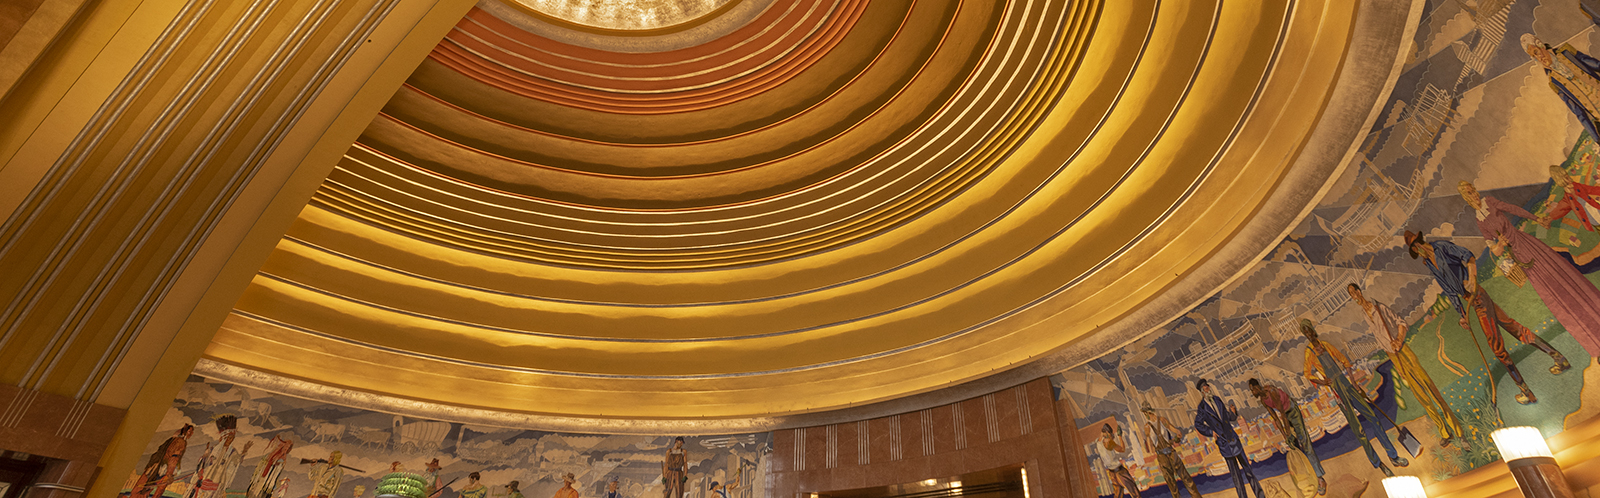 Union Terminal's rotunda, murals, and light fixtuers have been meticulously cleaned.